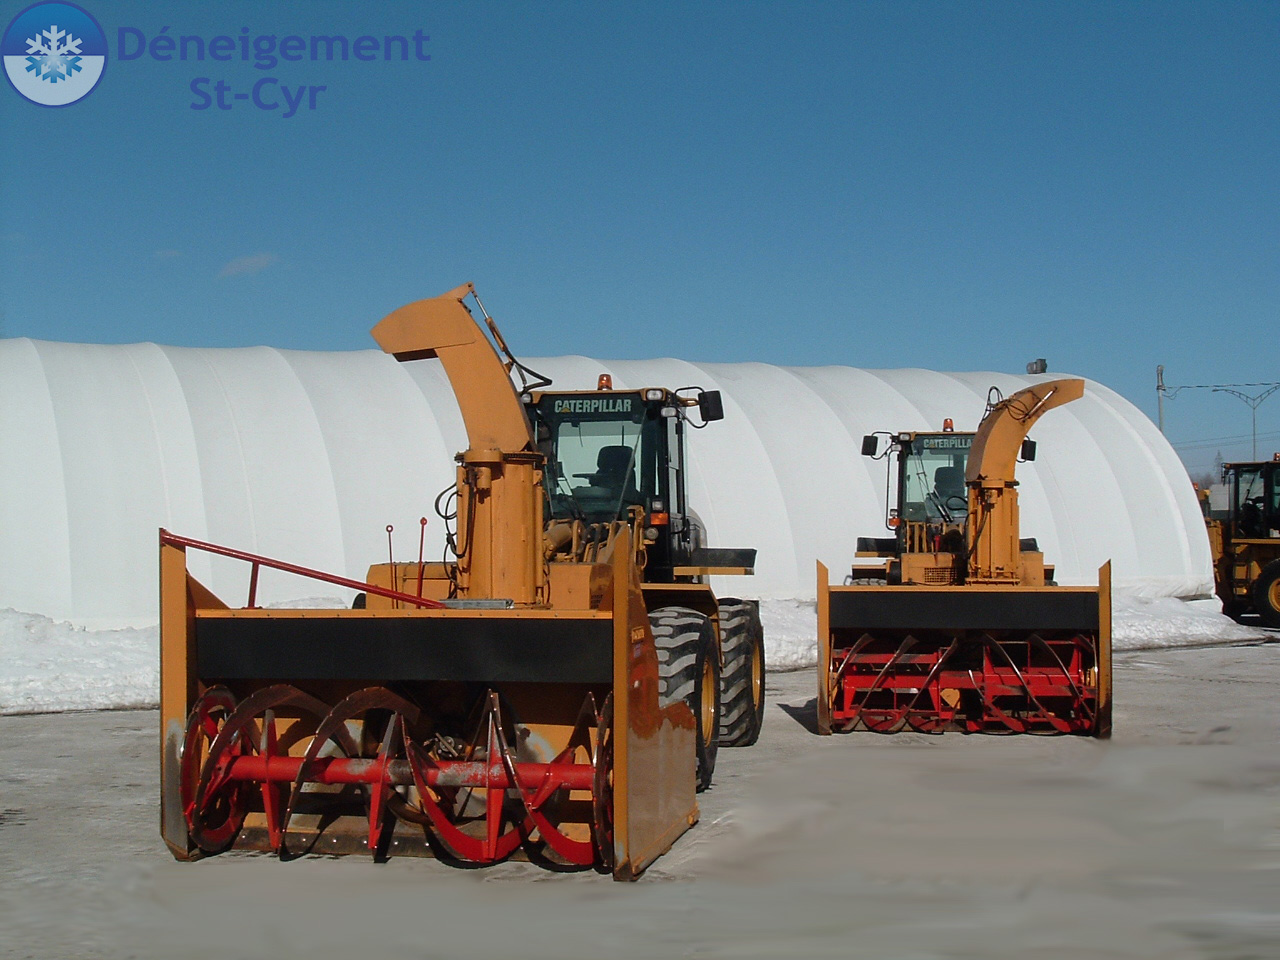 Large capacity industrial snow blowers - Deneigement St-Cyr - Commercial Snow Removal